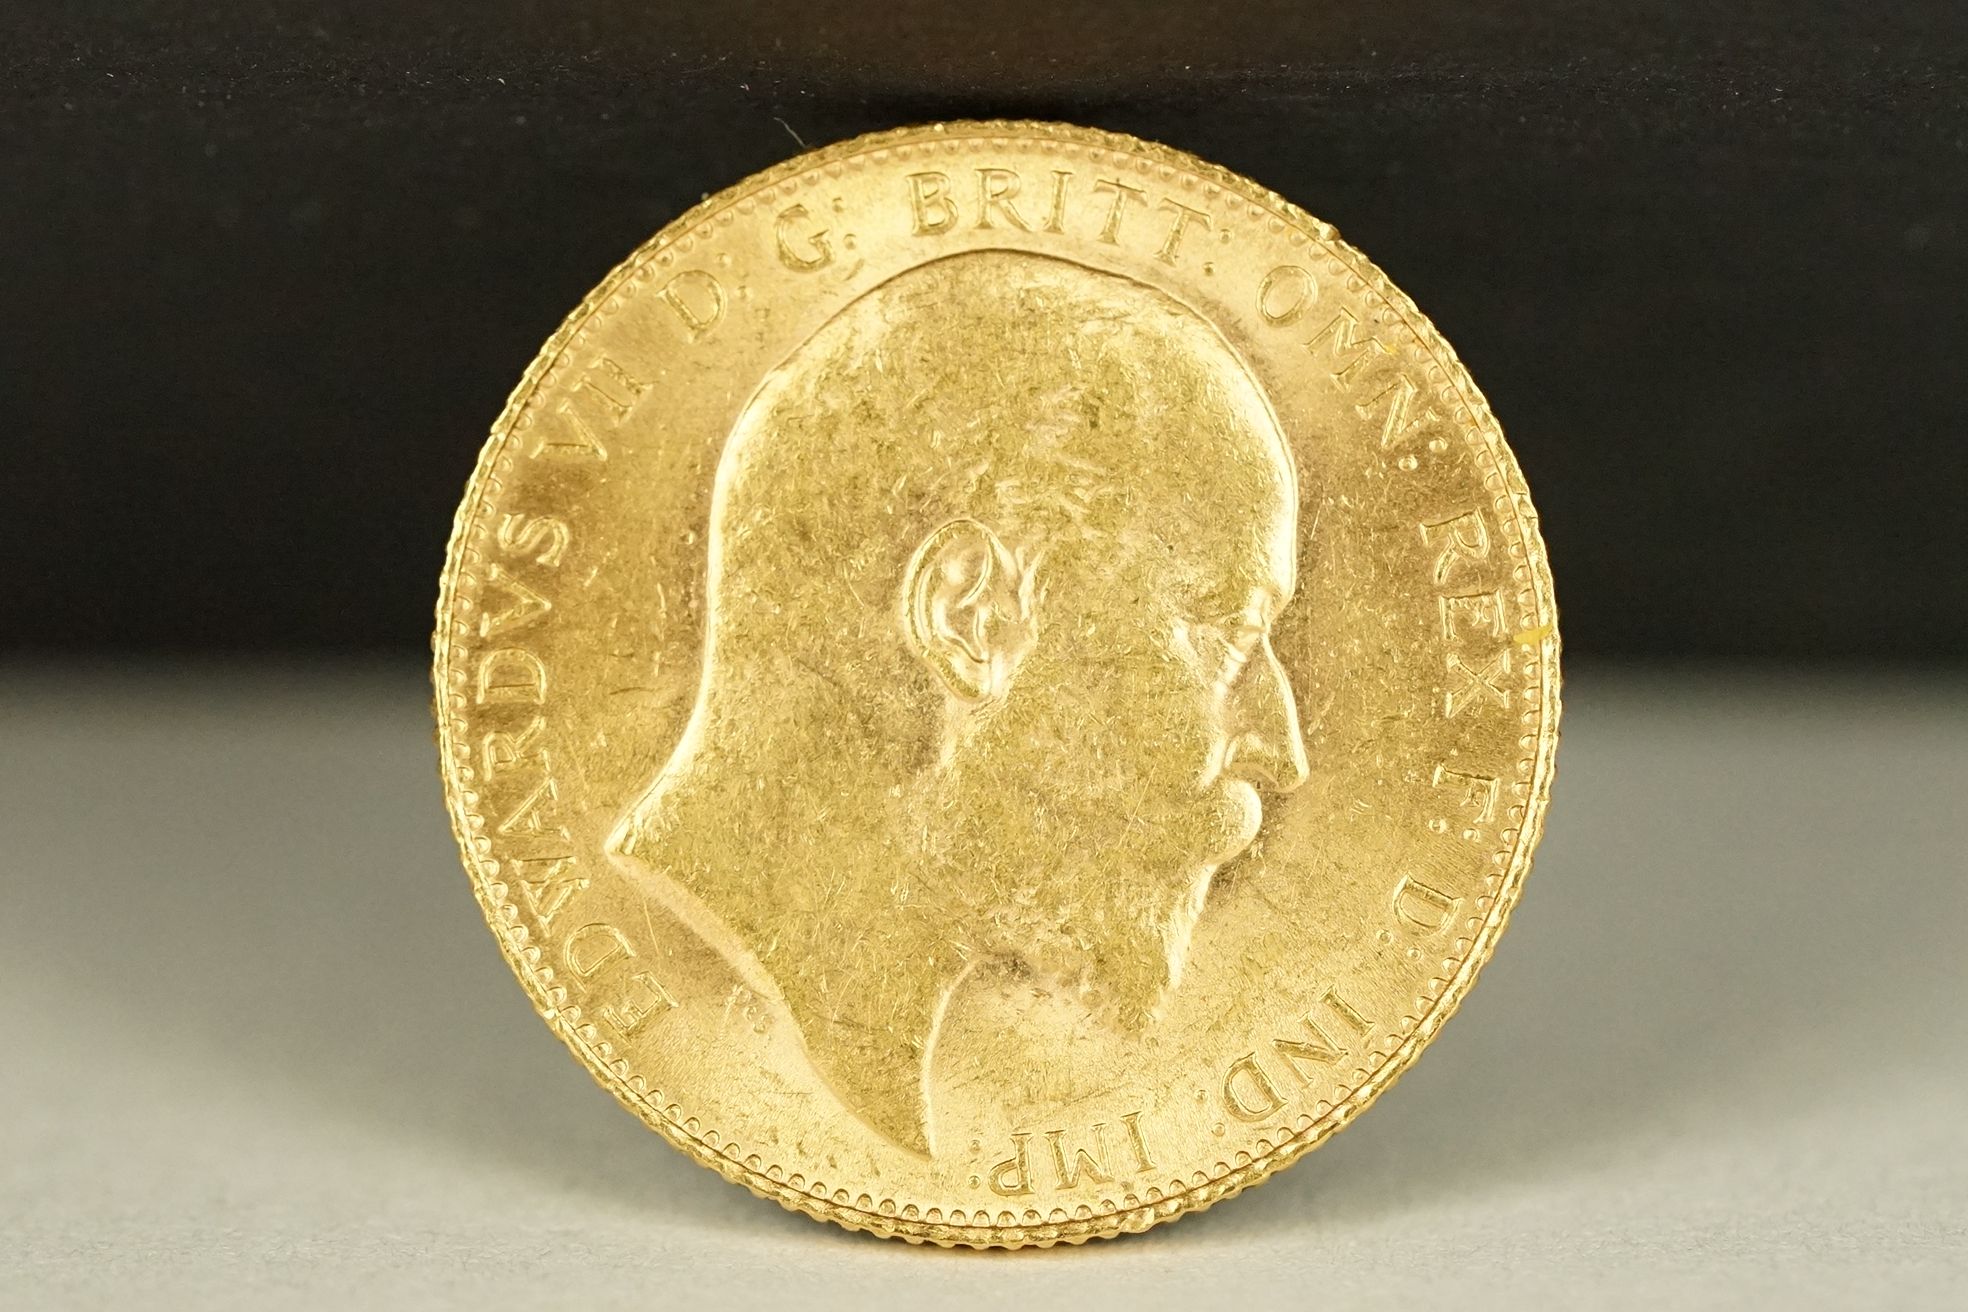 A British King Edward VII 1906 gold full sovereign coin. - Image 2 of 3